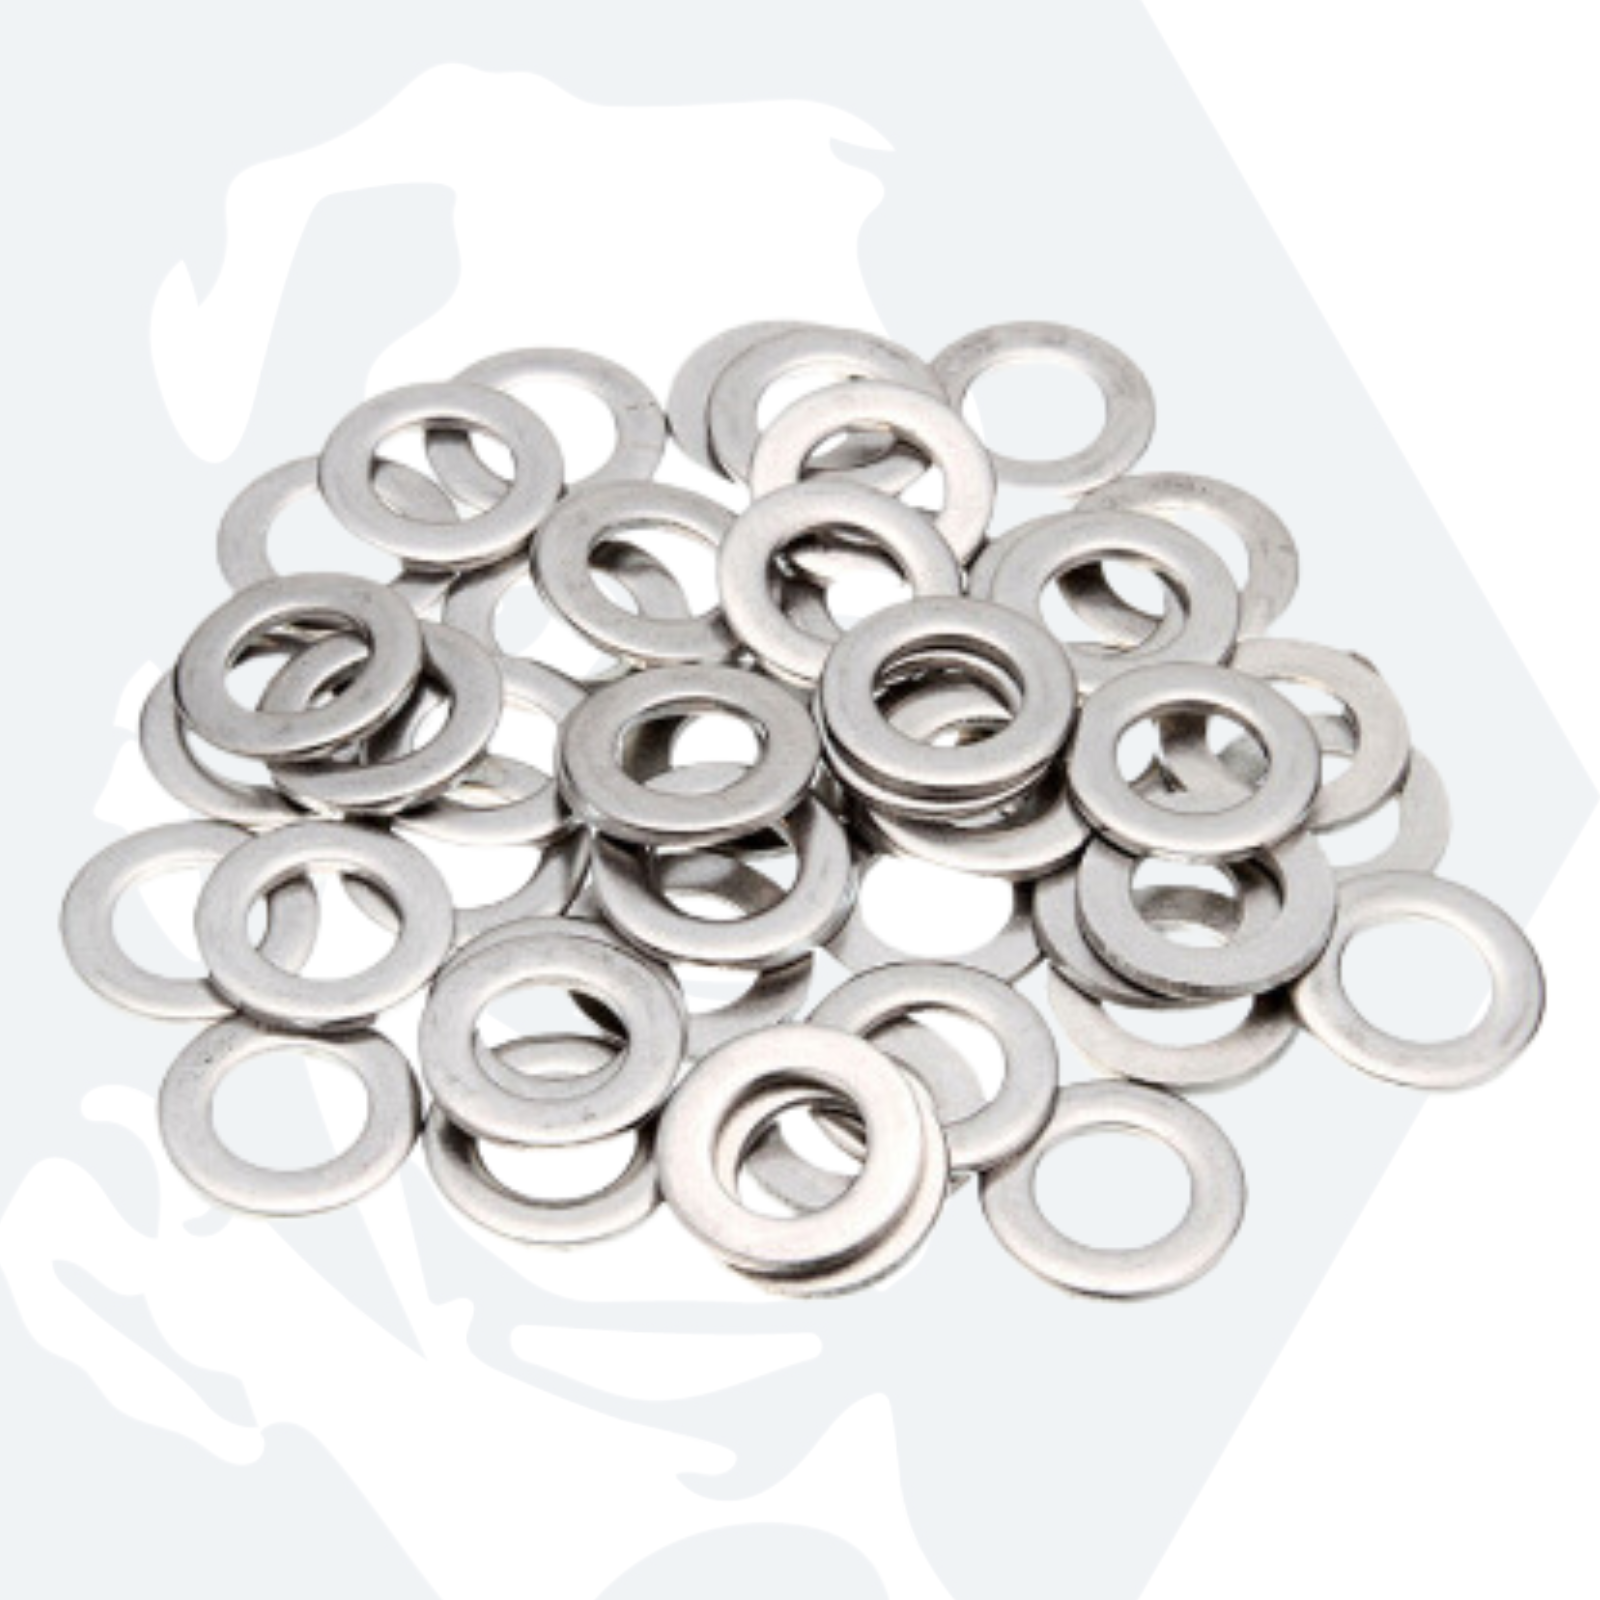 M8 Form A Flat Washers (DIN 125) - Stainless Steel (A2)